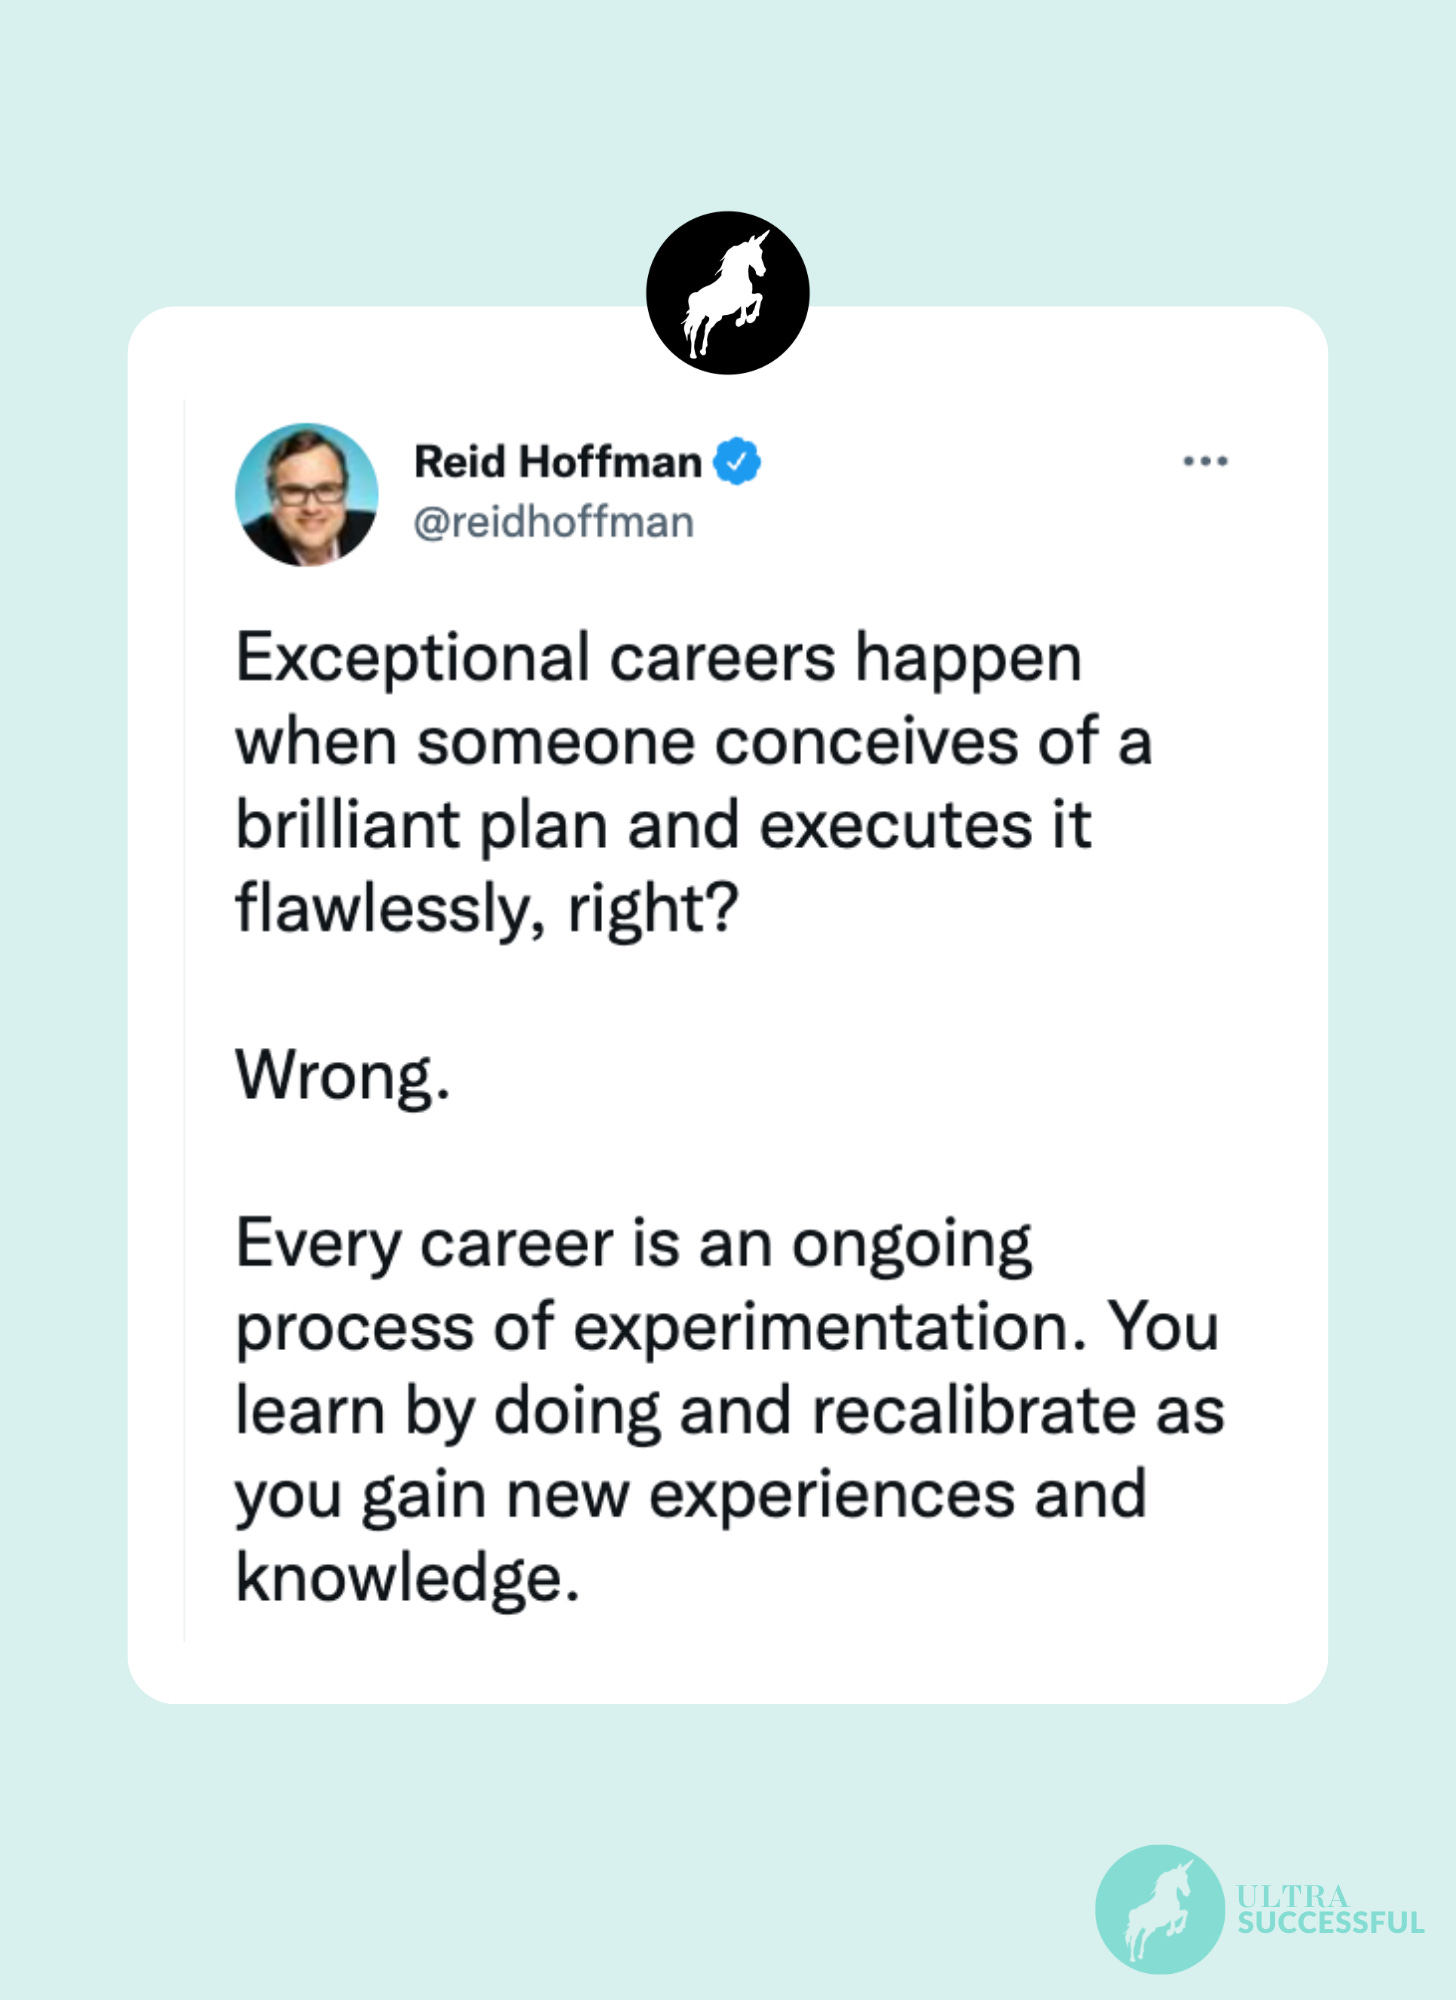 @reidhoffman: Exceptional careers happen when someone conceives of a brilliant plan and executes it flawlessly, right?    Wrong.    Every career is an ongoing process of experimentation. You learn by doing and recalibrate as you gain new experiences and knowledge.